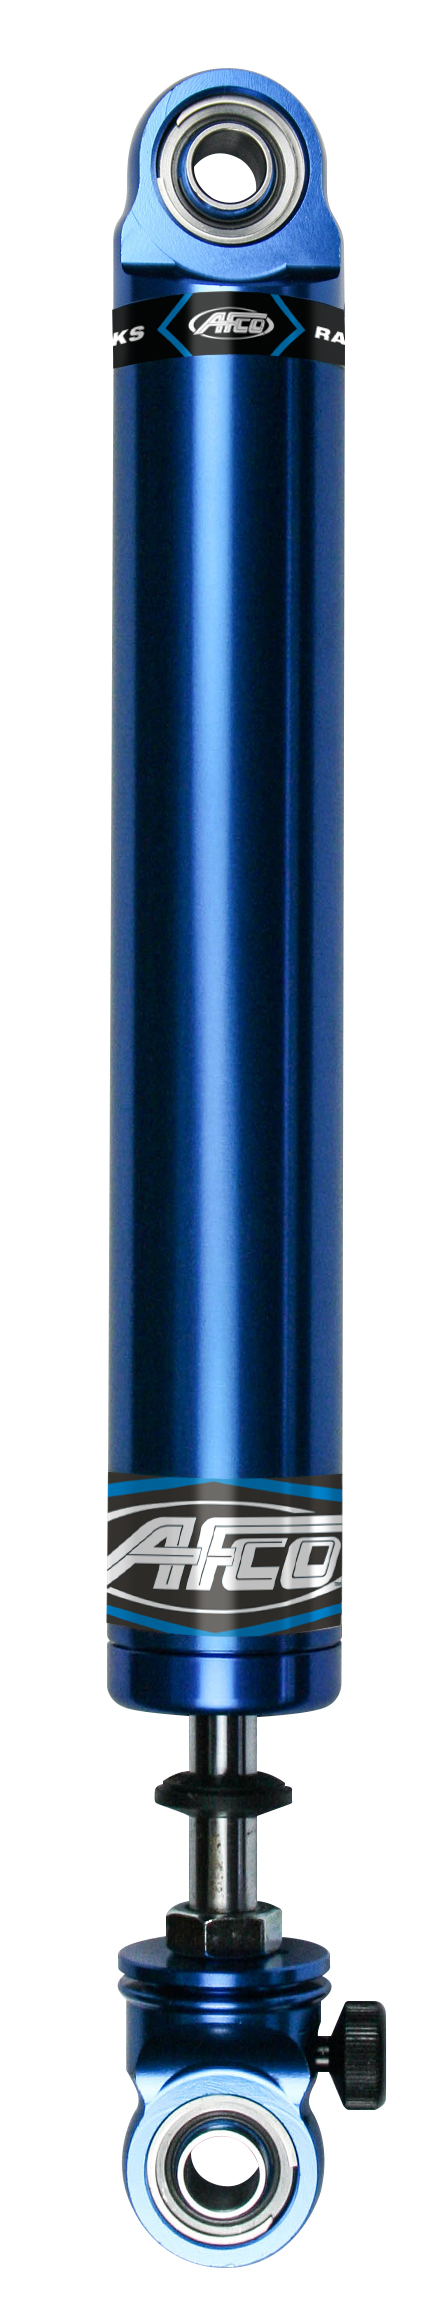 Aluminum Shock Twin Tube 16 Series Small Body 6 Inch Comp 5/Reb 3-6 Smooth